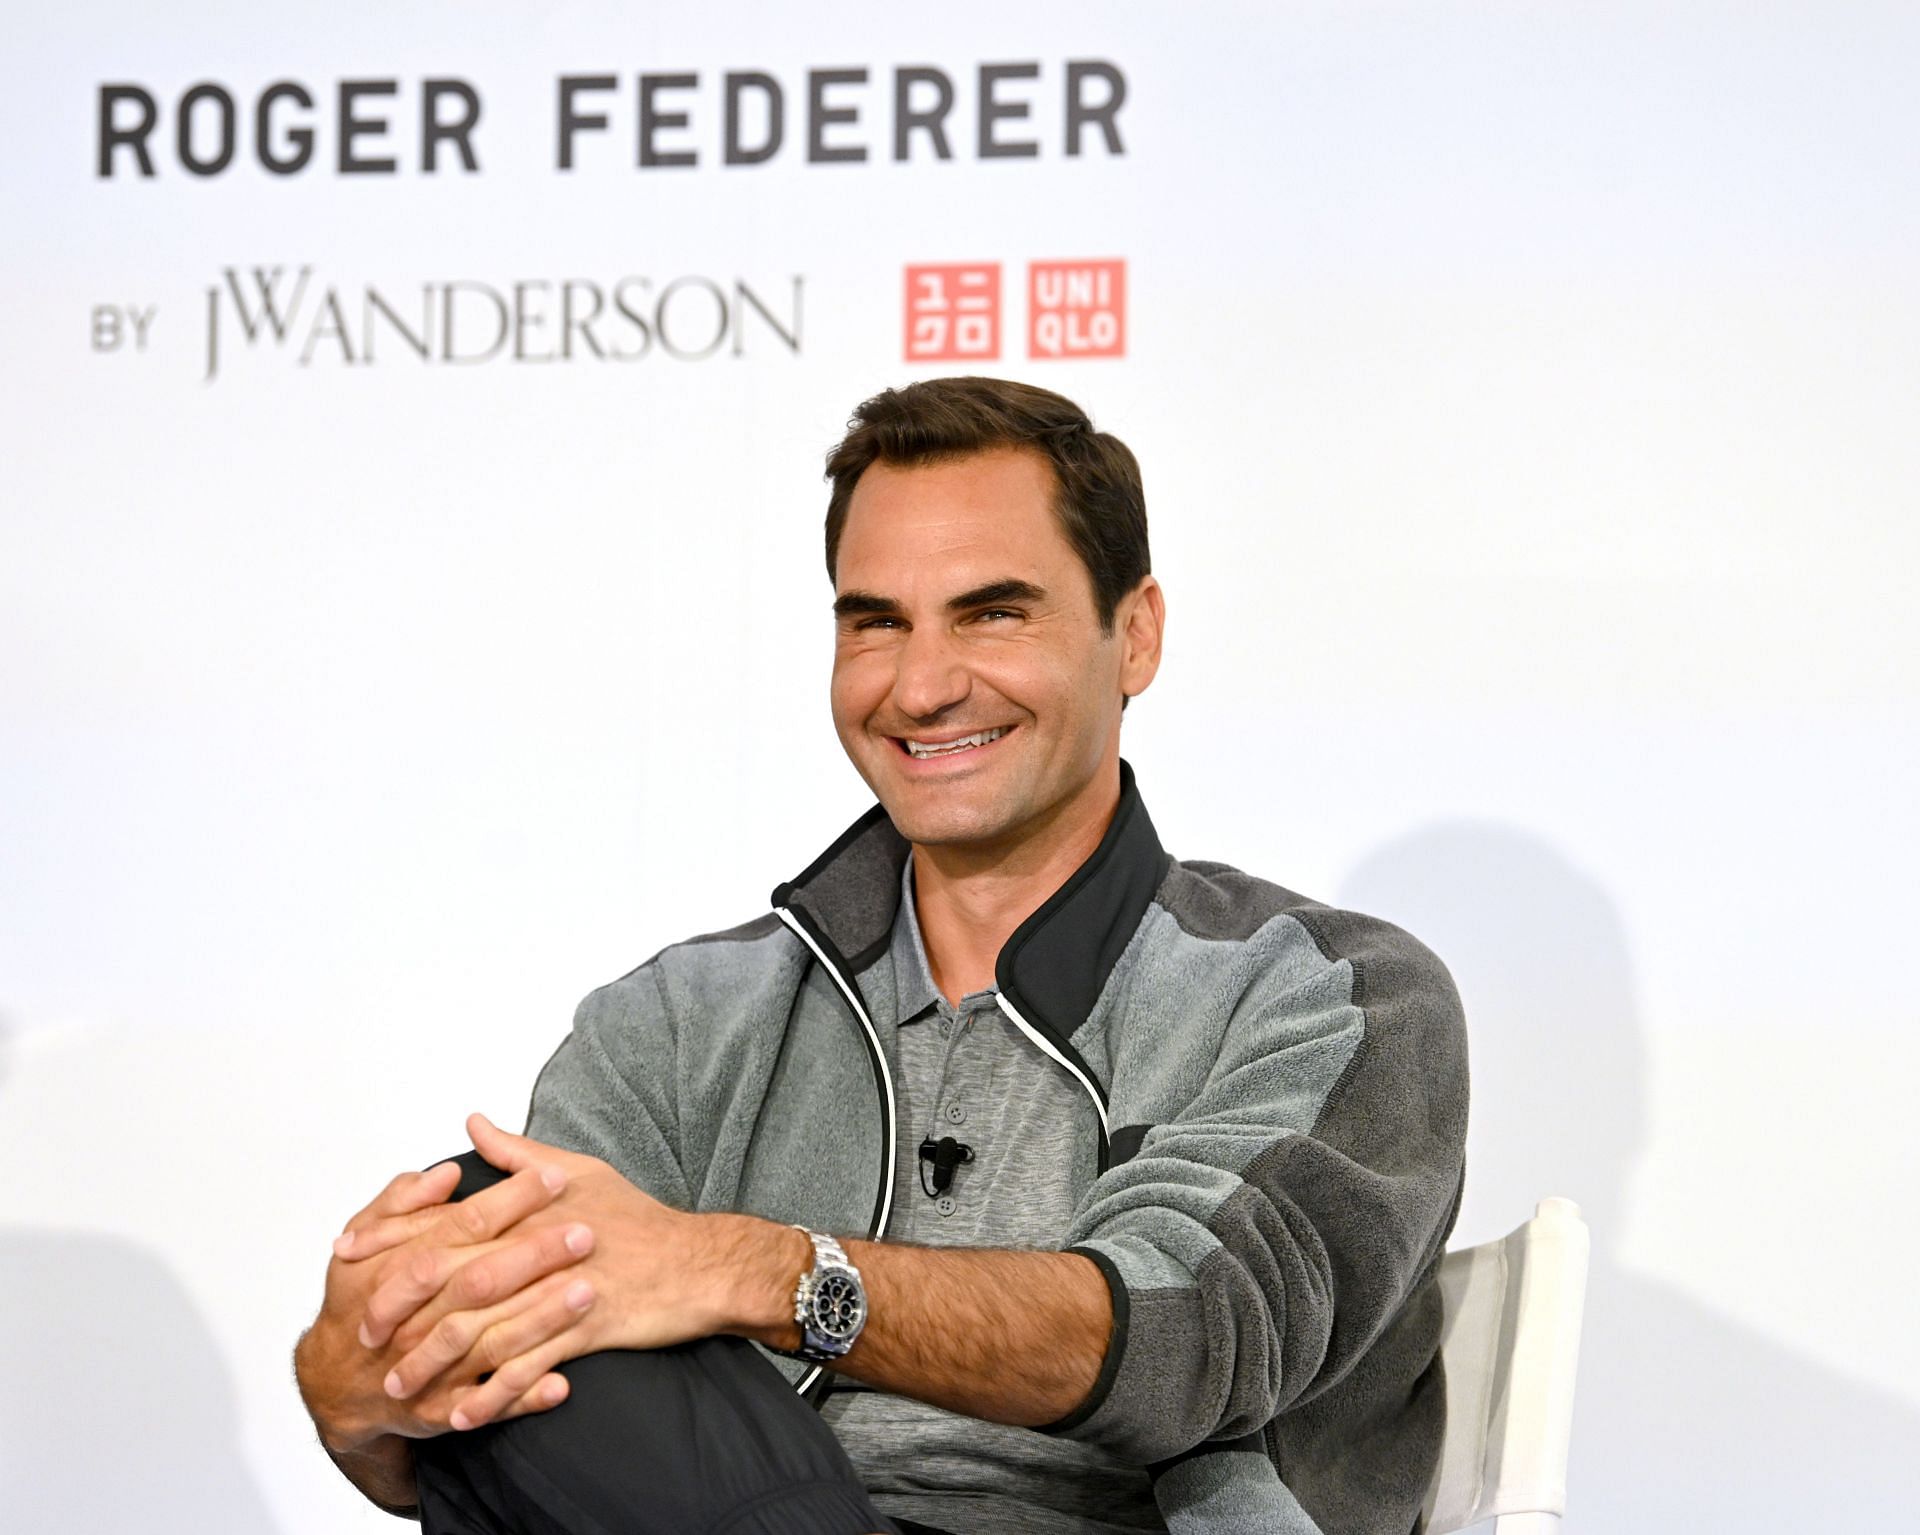 Roger Federer at the launch of his new UNIQLO collection